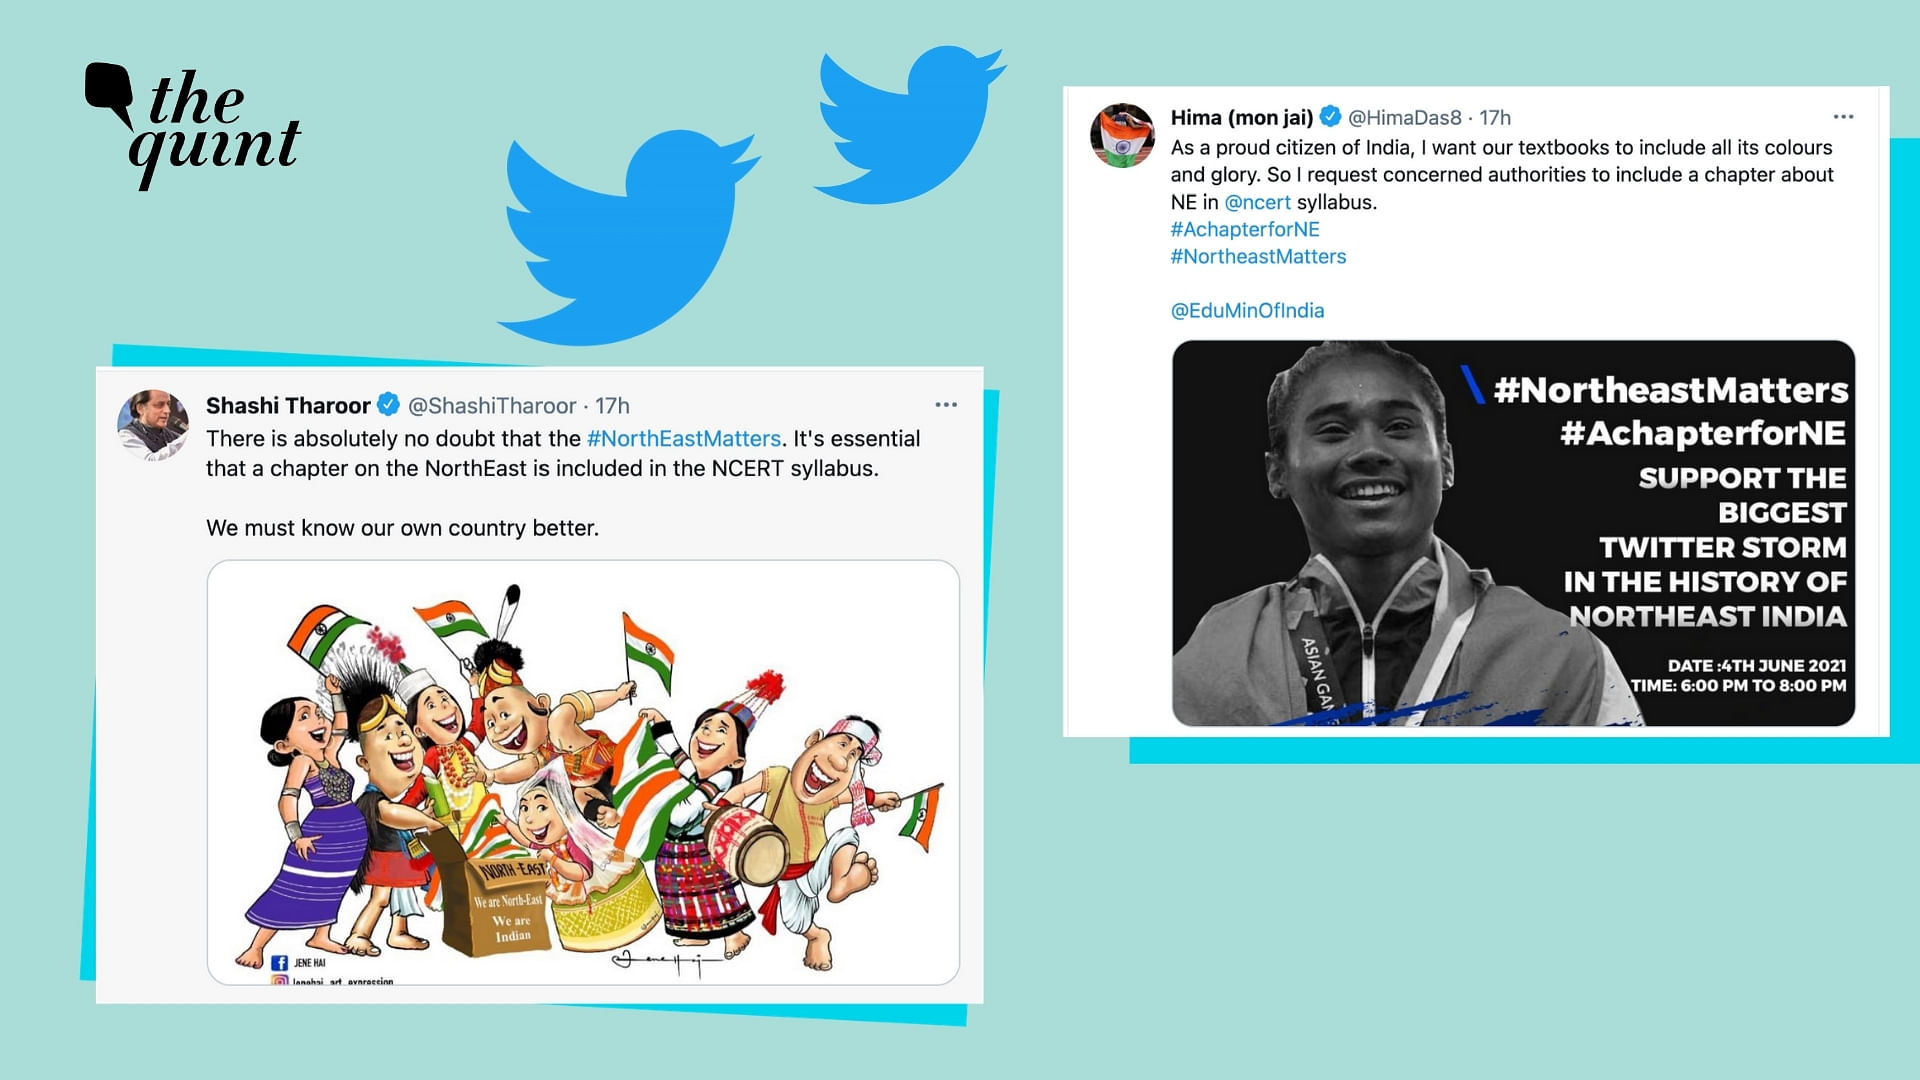 <div class="paragraphs"><p>The Twitter storm was joined by several eminent personalities from 6-8 pm on 4 June.</p></div>